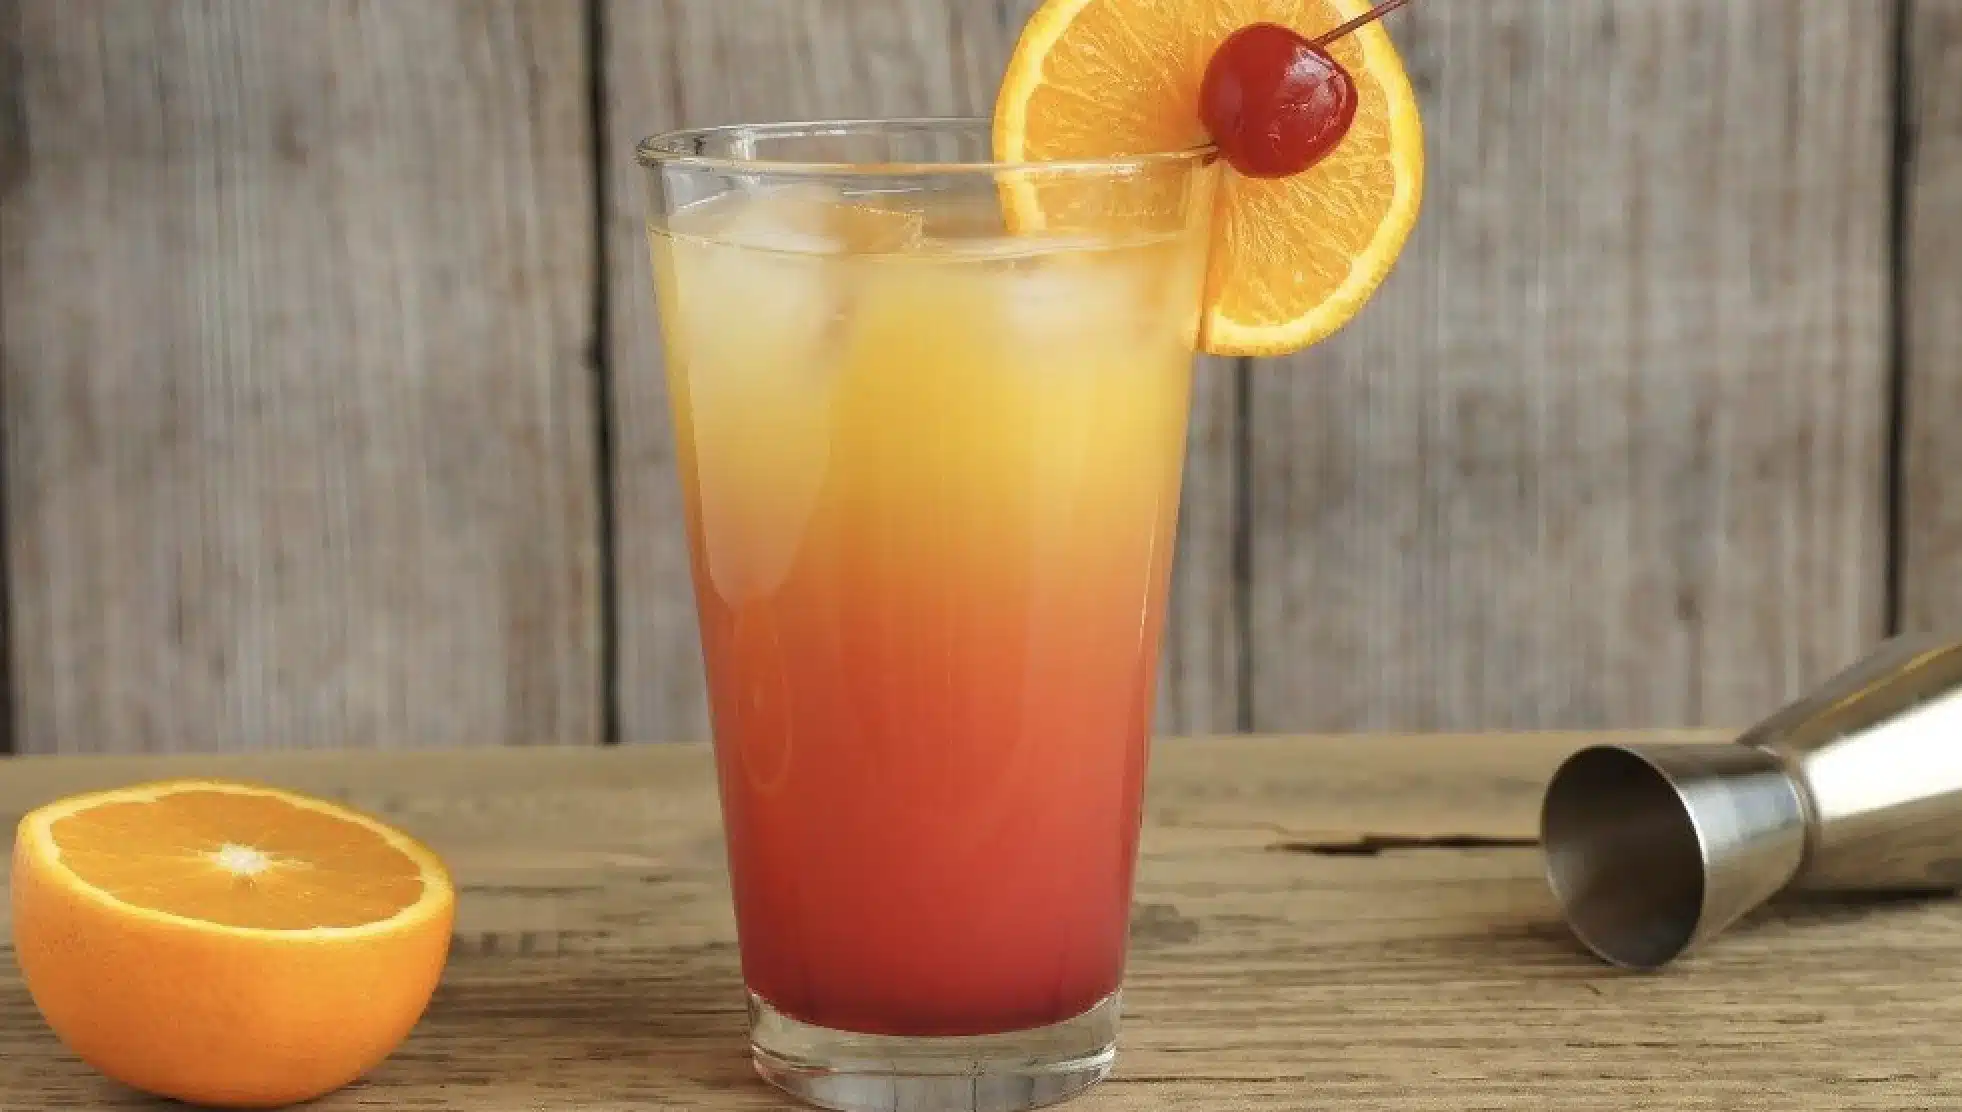 A glass of Corona Sunrise with a cherry on top and an orange on the side